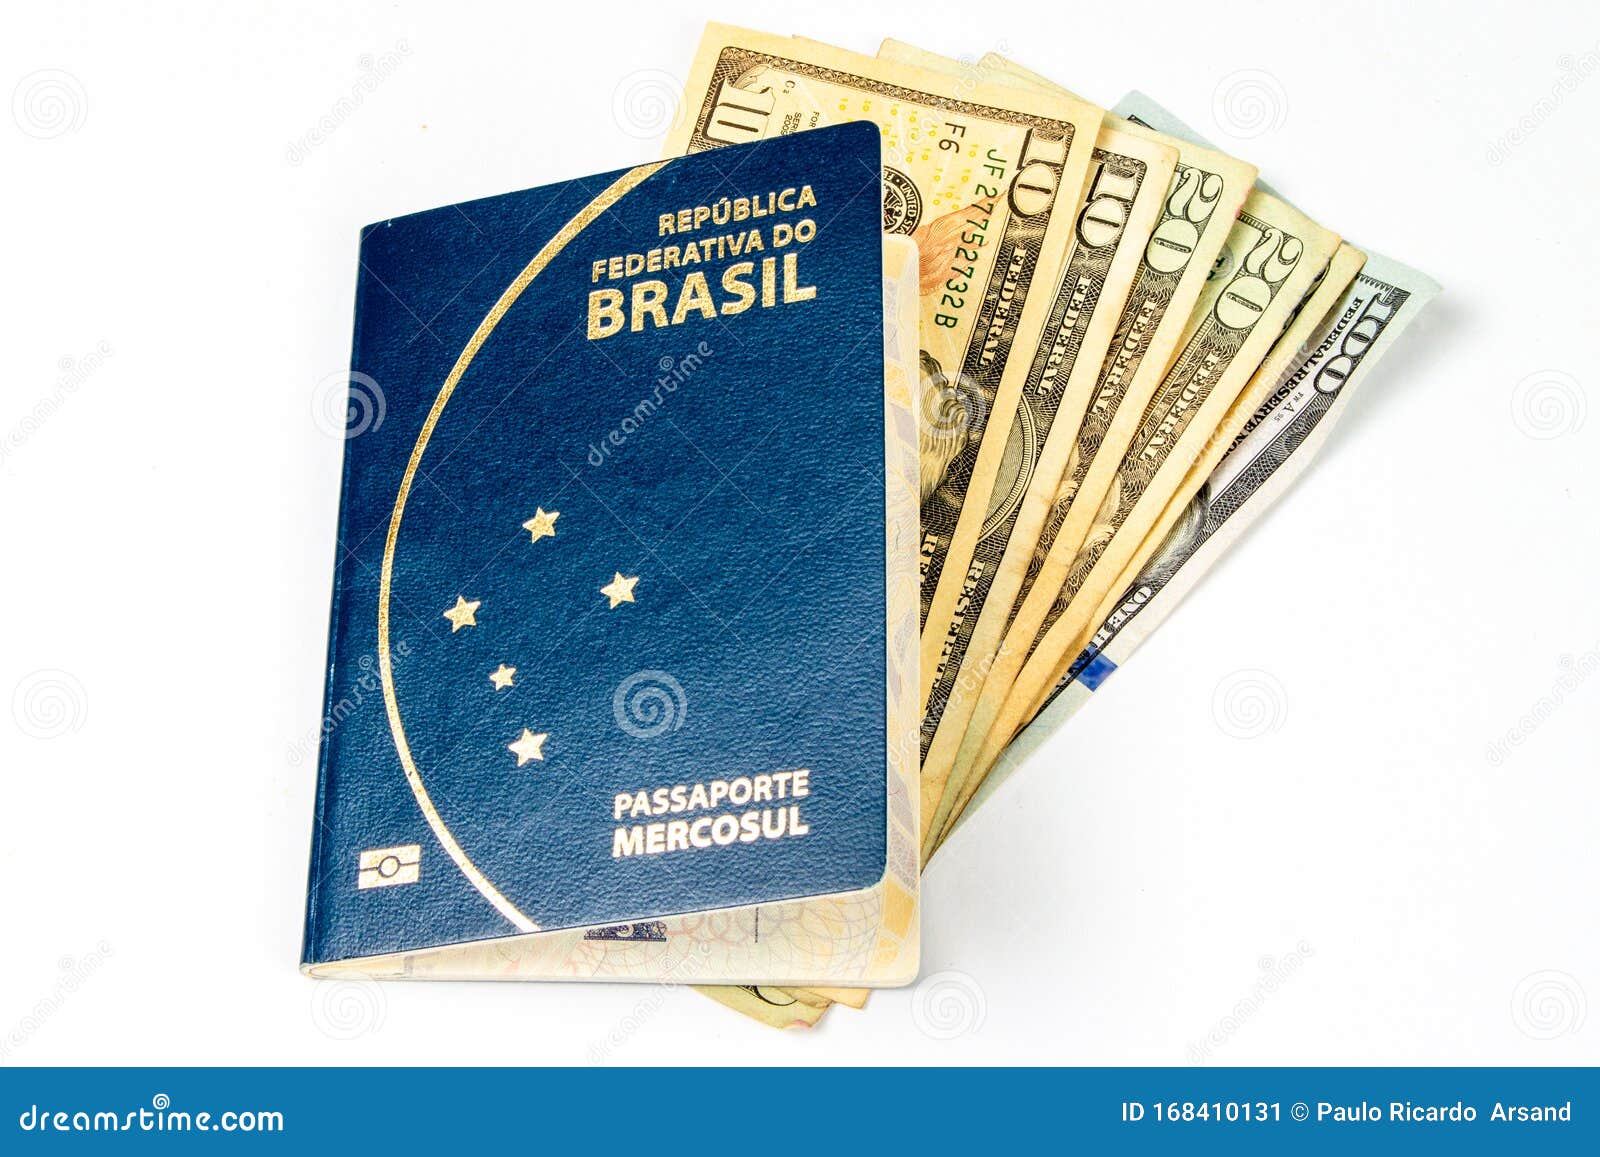 new brazilian passaport, with some dollar bills in a white background.